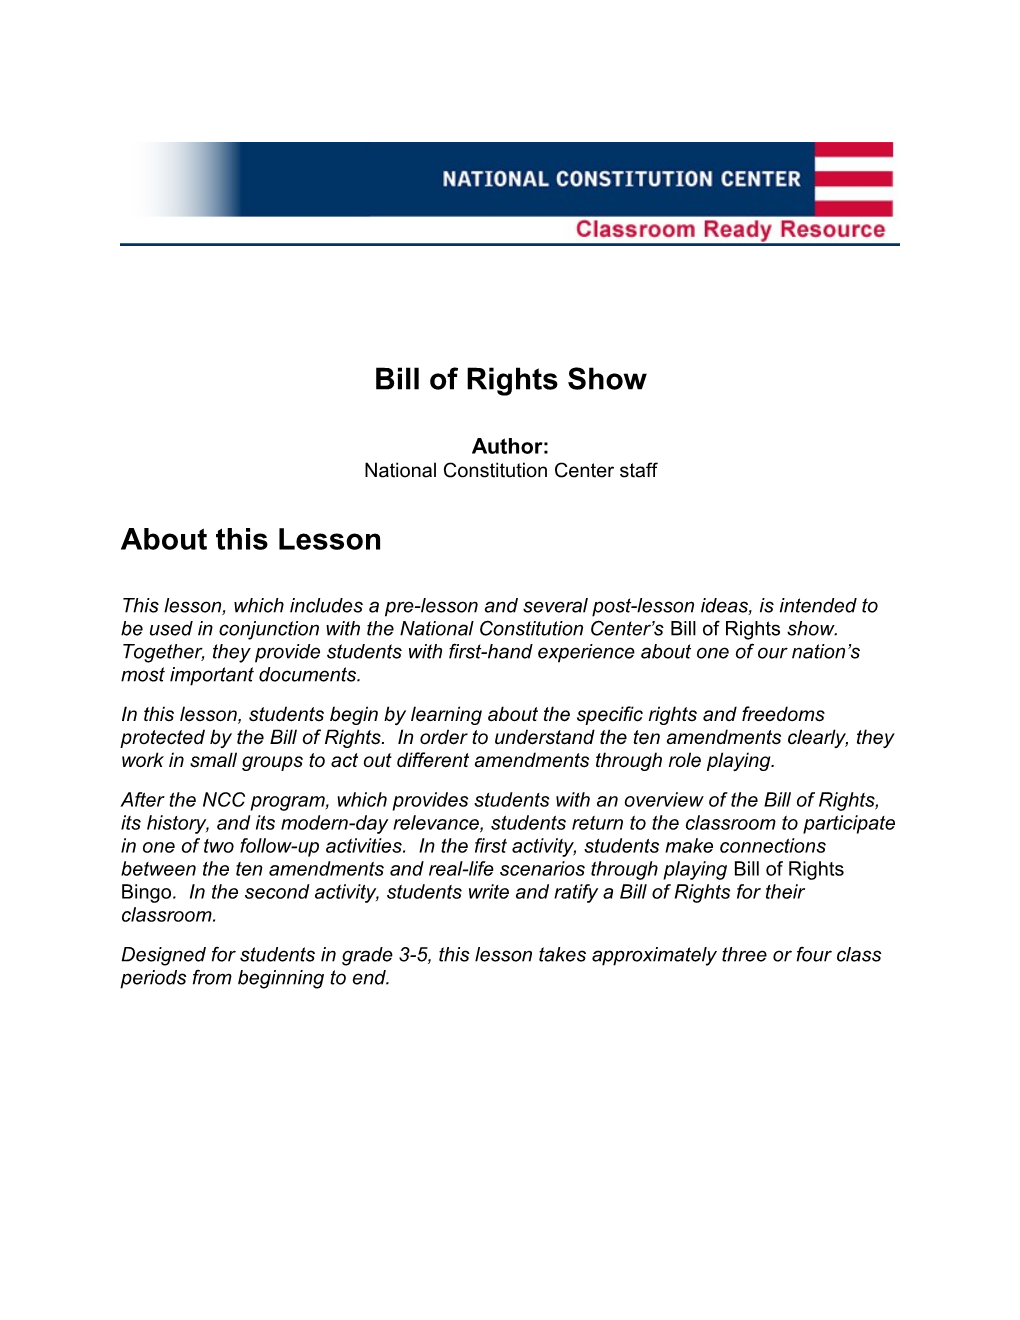 Bill of Rights Show